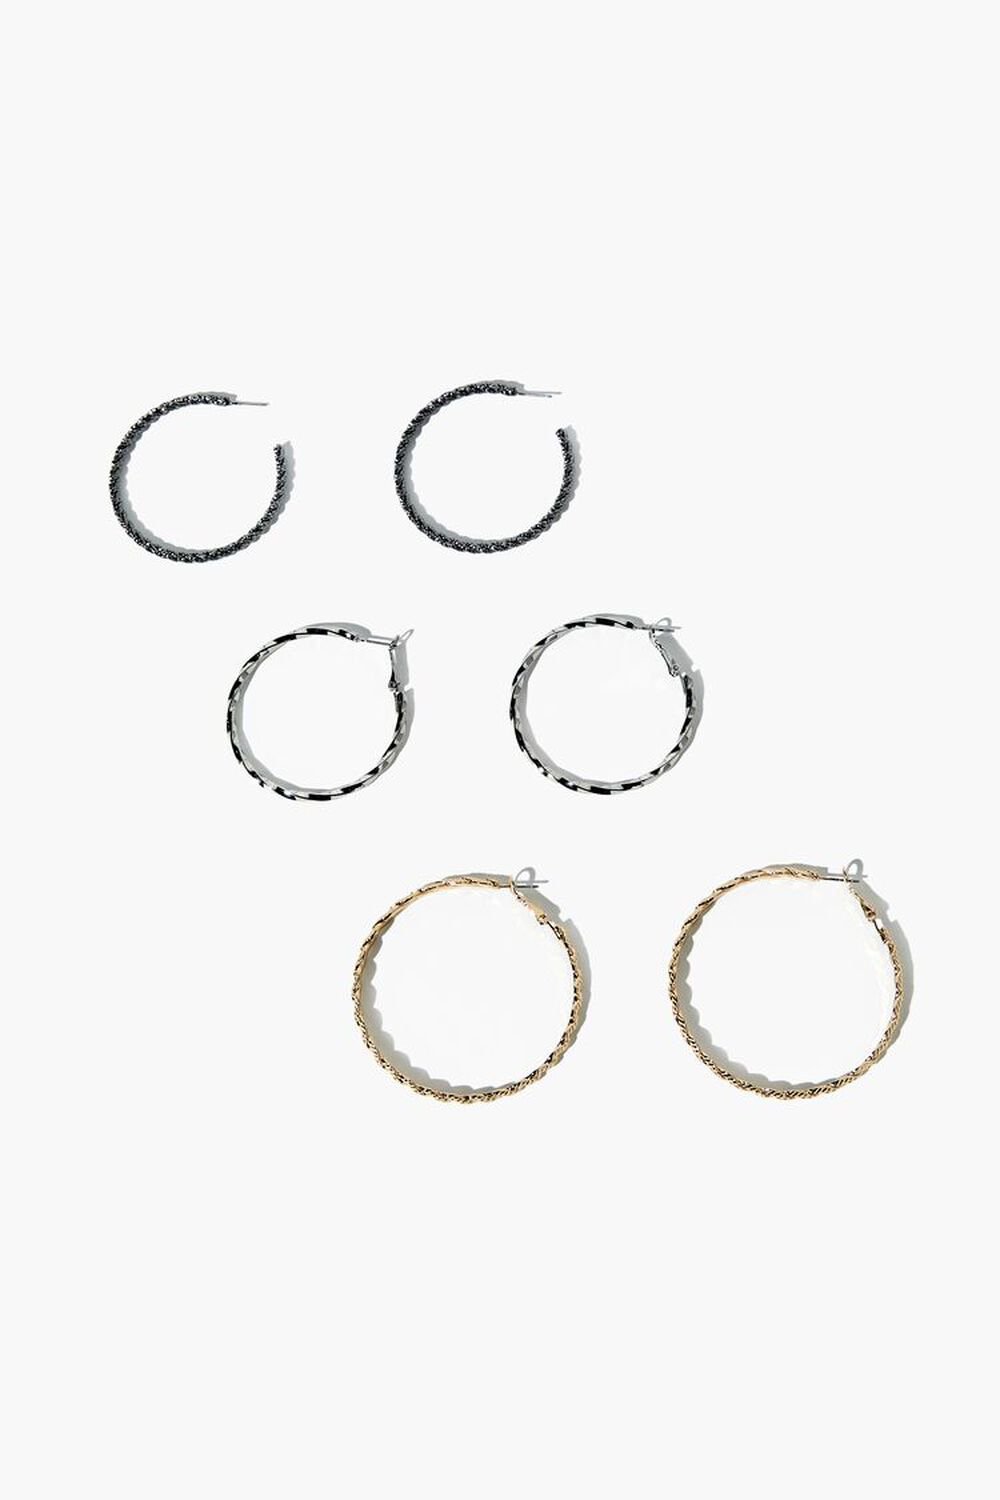 GOLD/SILVER Etched Hoop Earring Set, image 1